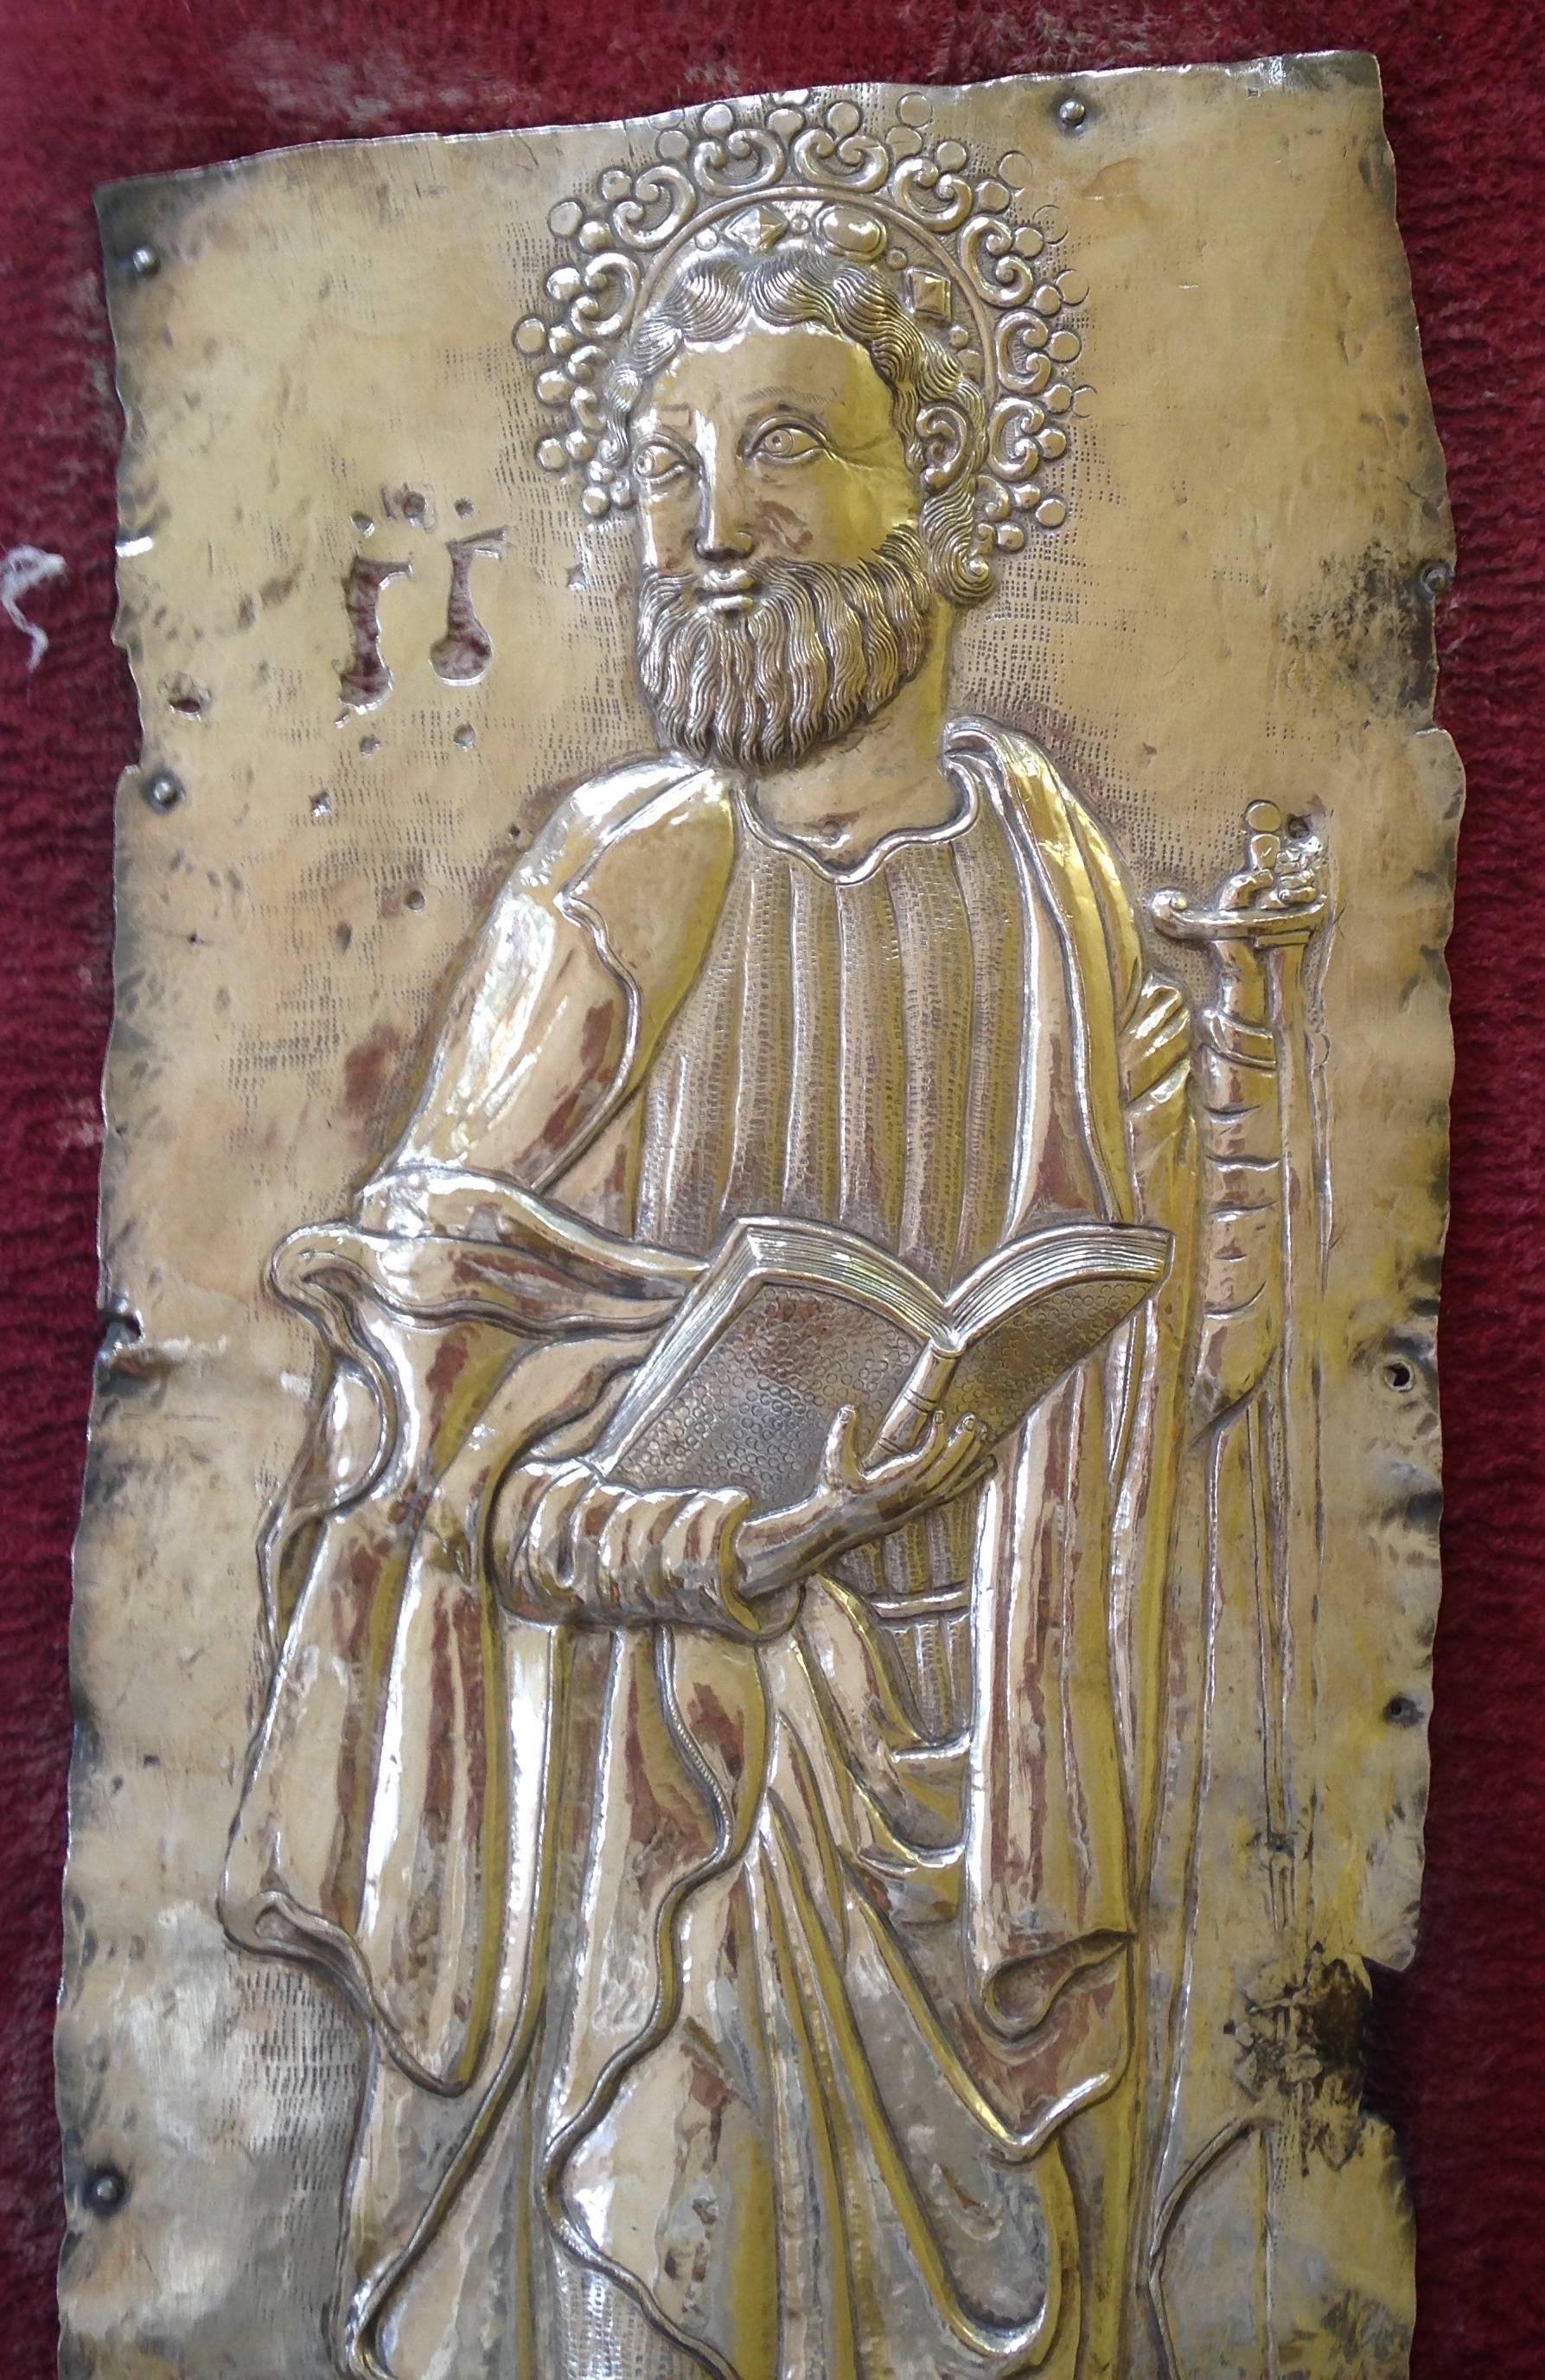 A SPANISH COLONIAL SILVER PLAQUE OF SAINT JOHN THE EVANGELIST - Sculpture by Unknown